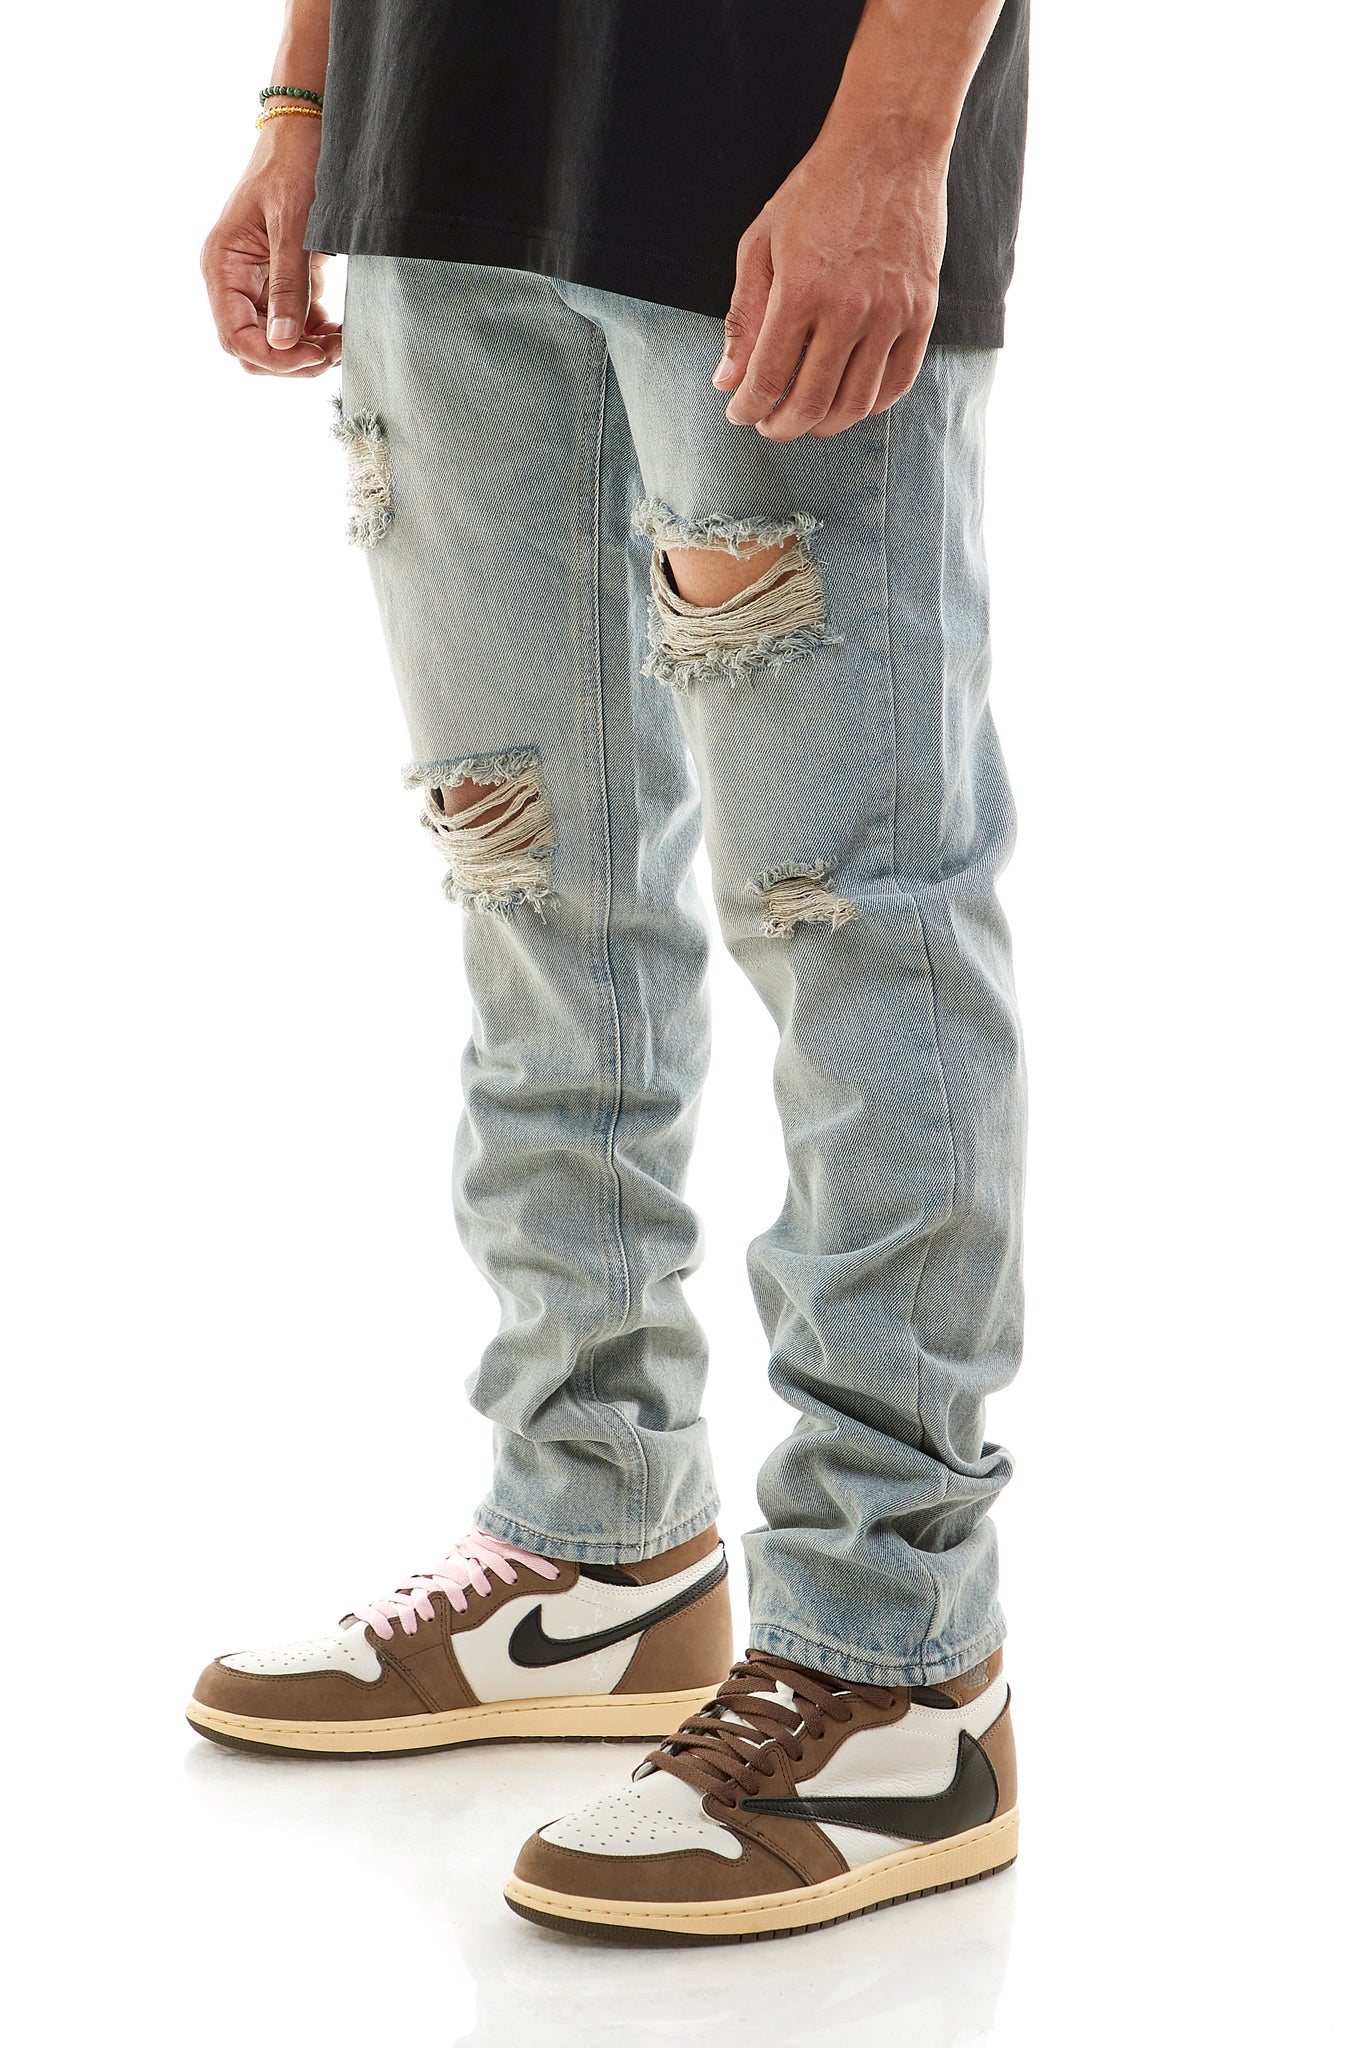 RELAXED & DISTRESSED JEANS